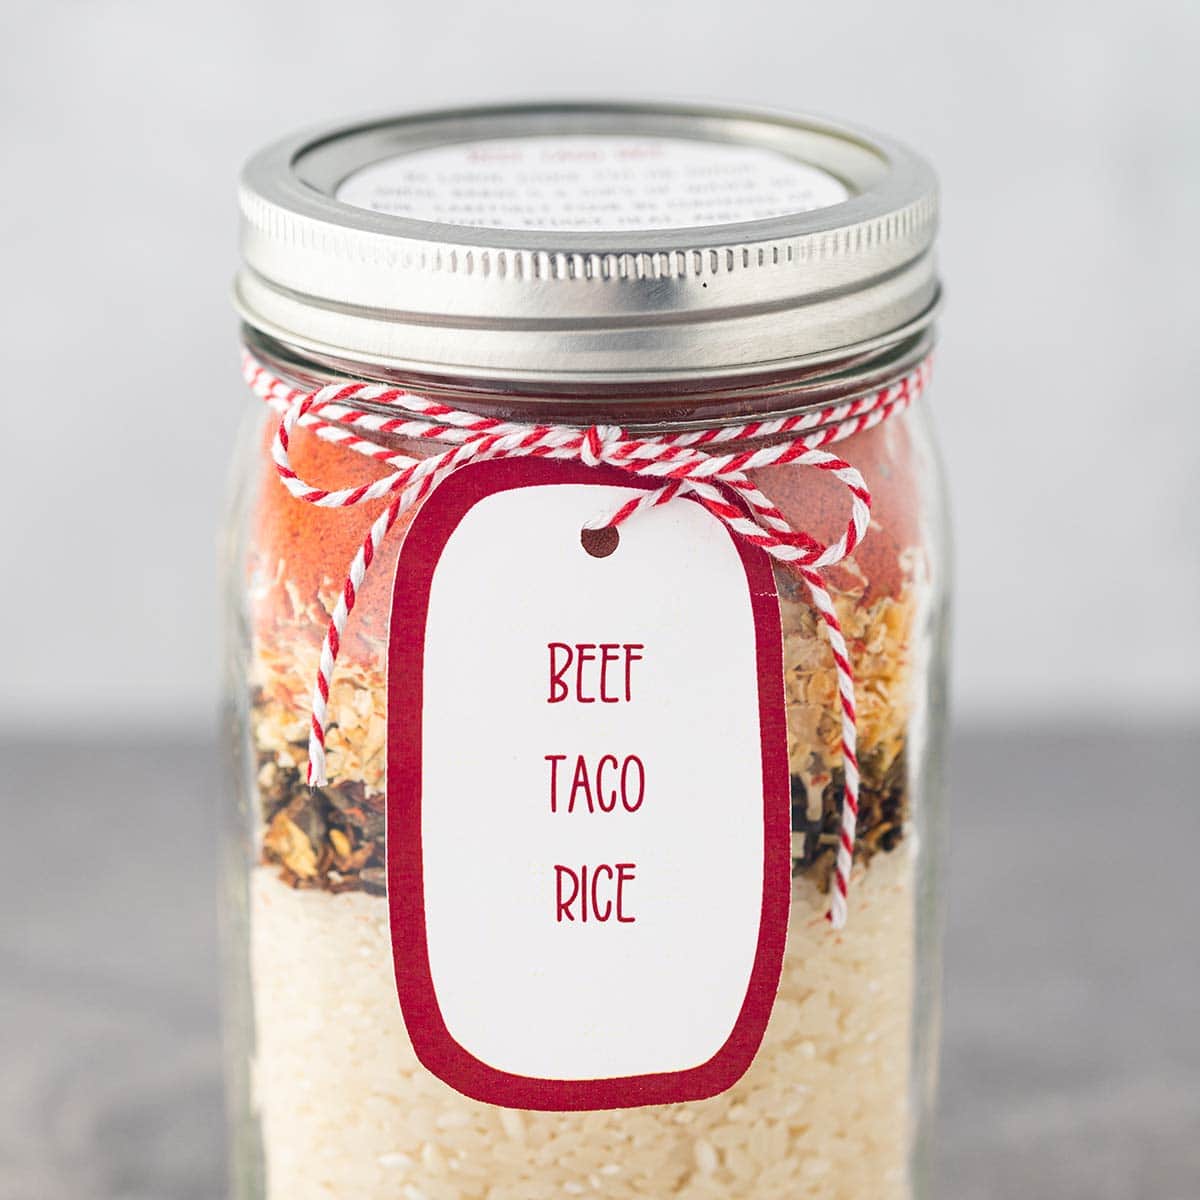 How to Store Rice in Mason Jars for Long-Term Storage